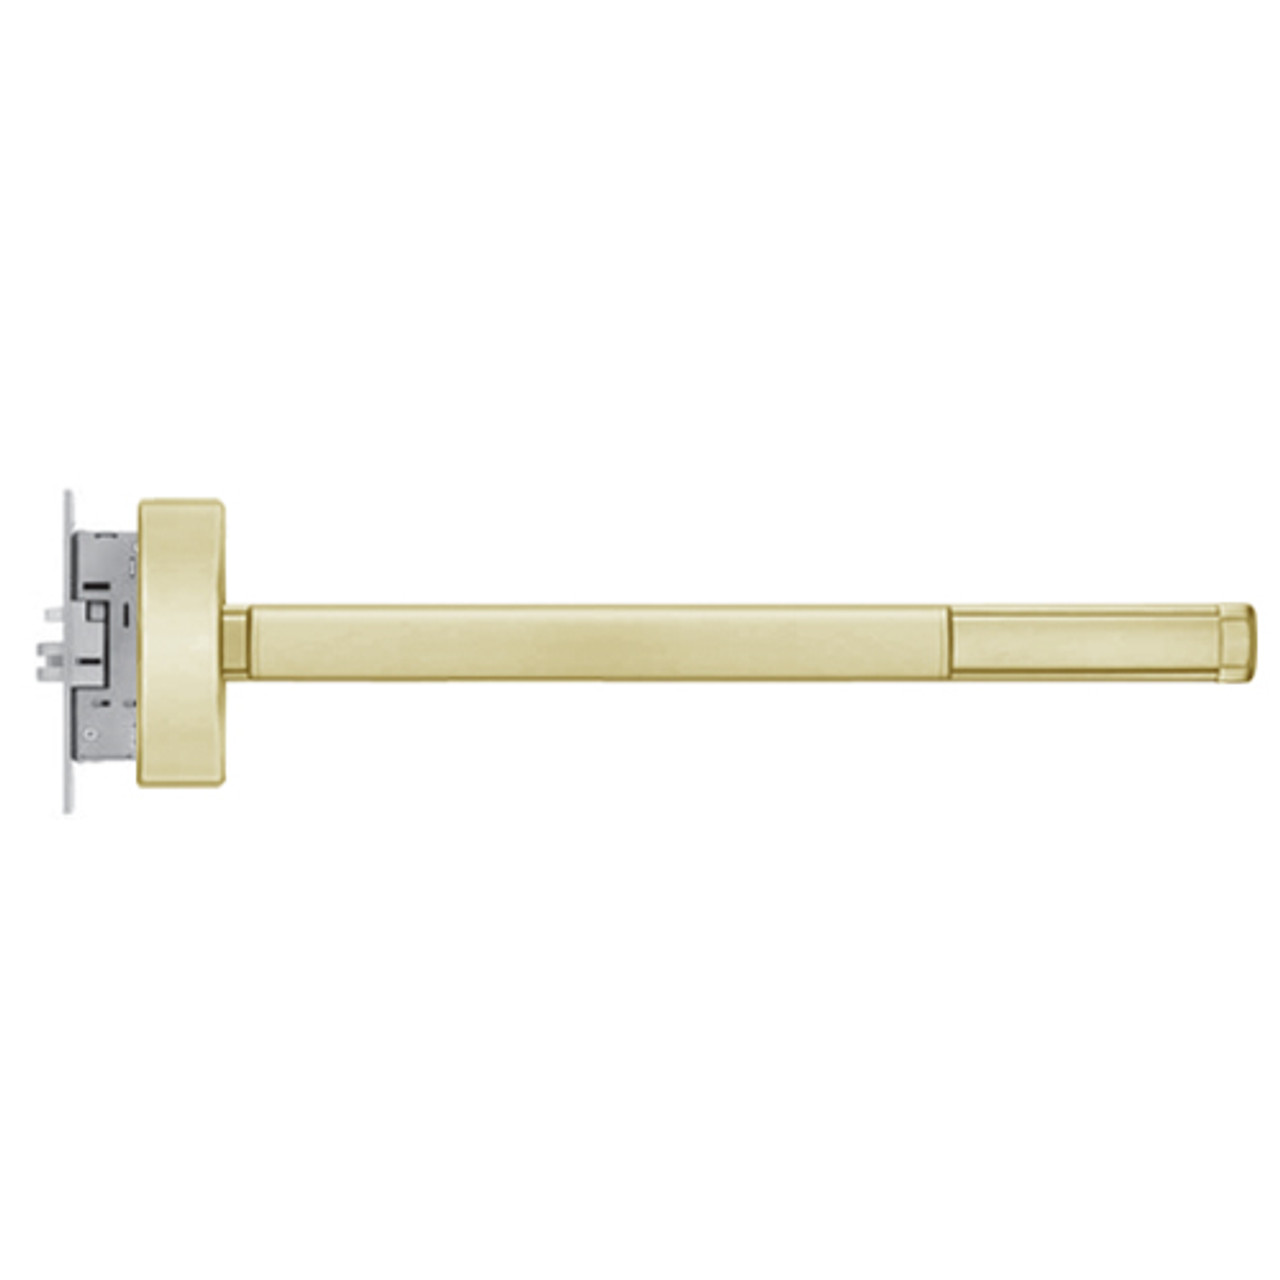 TSFL2308-LHR-606-48 PHI 2300 Series Fire Rated Apex Mortise Exit Device with Touchbar Monitoring Switch Prepped for Key Controls Lever/Knob in Satin Brass Finish